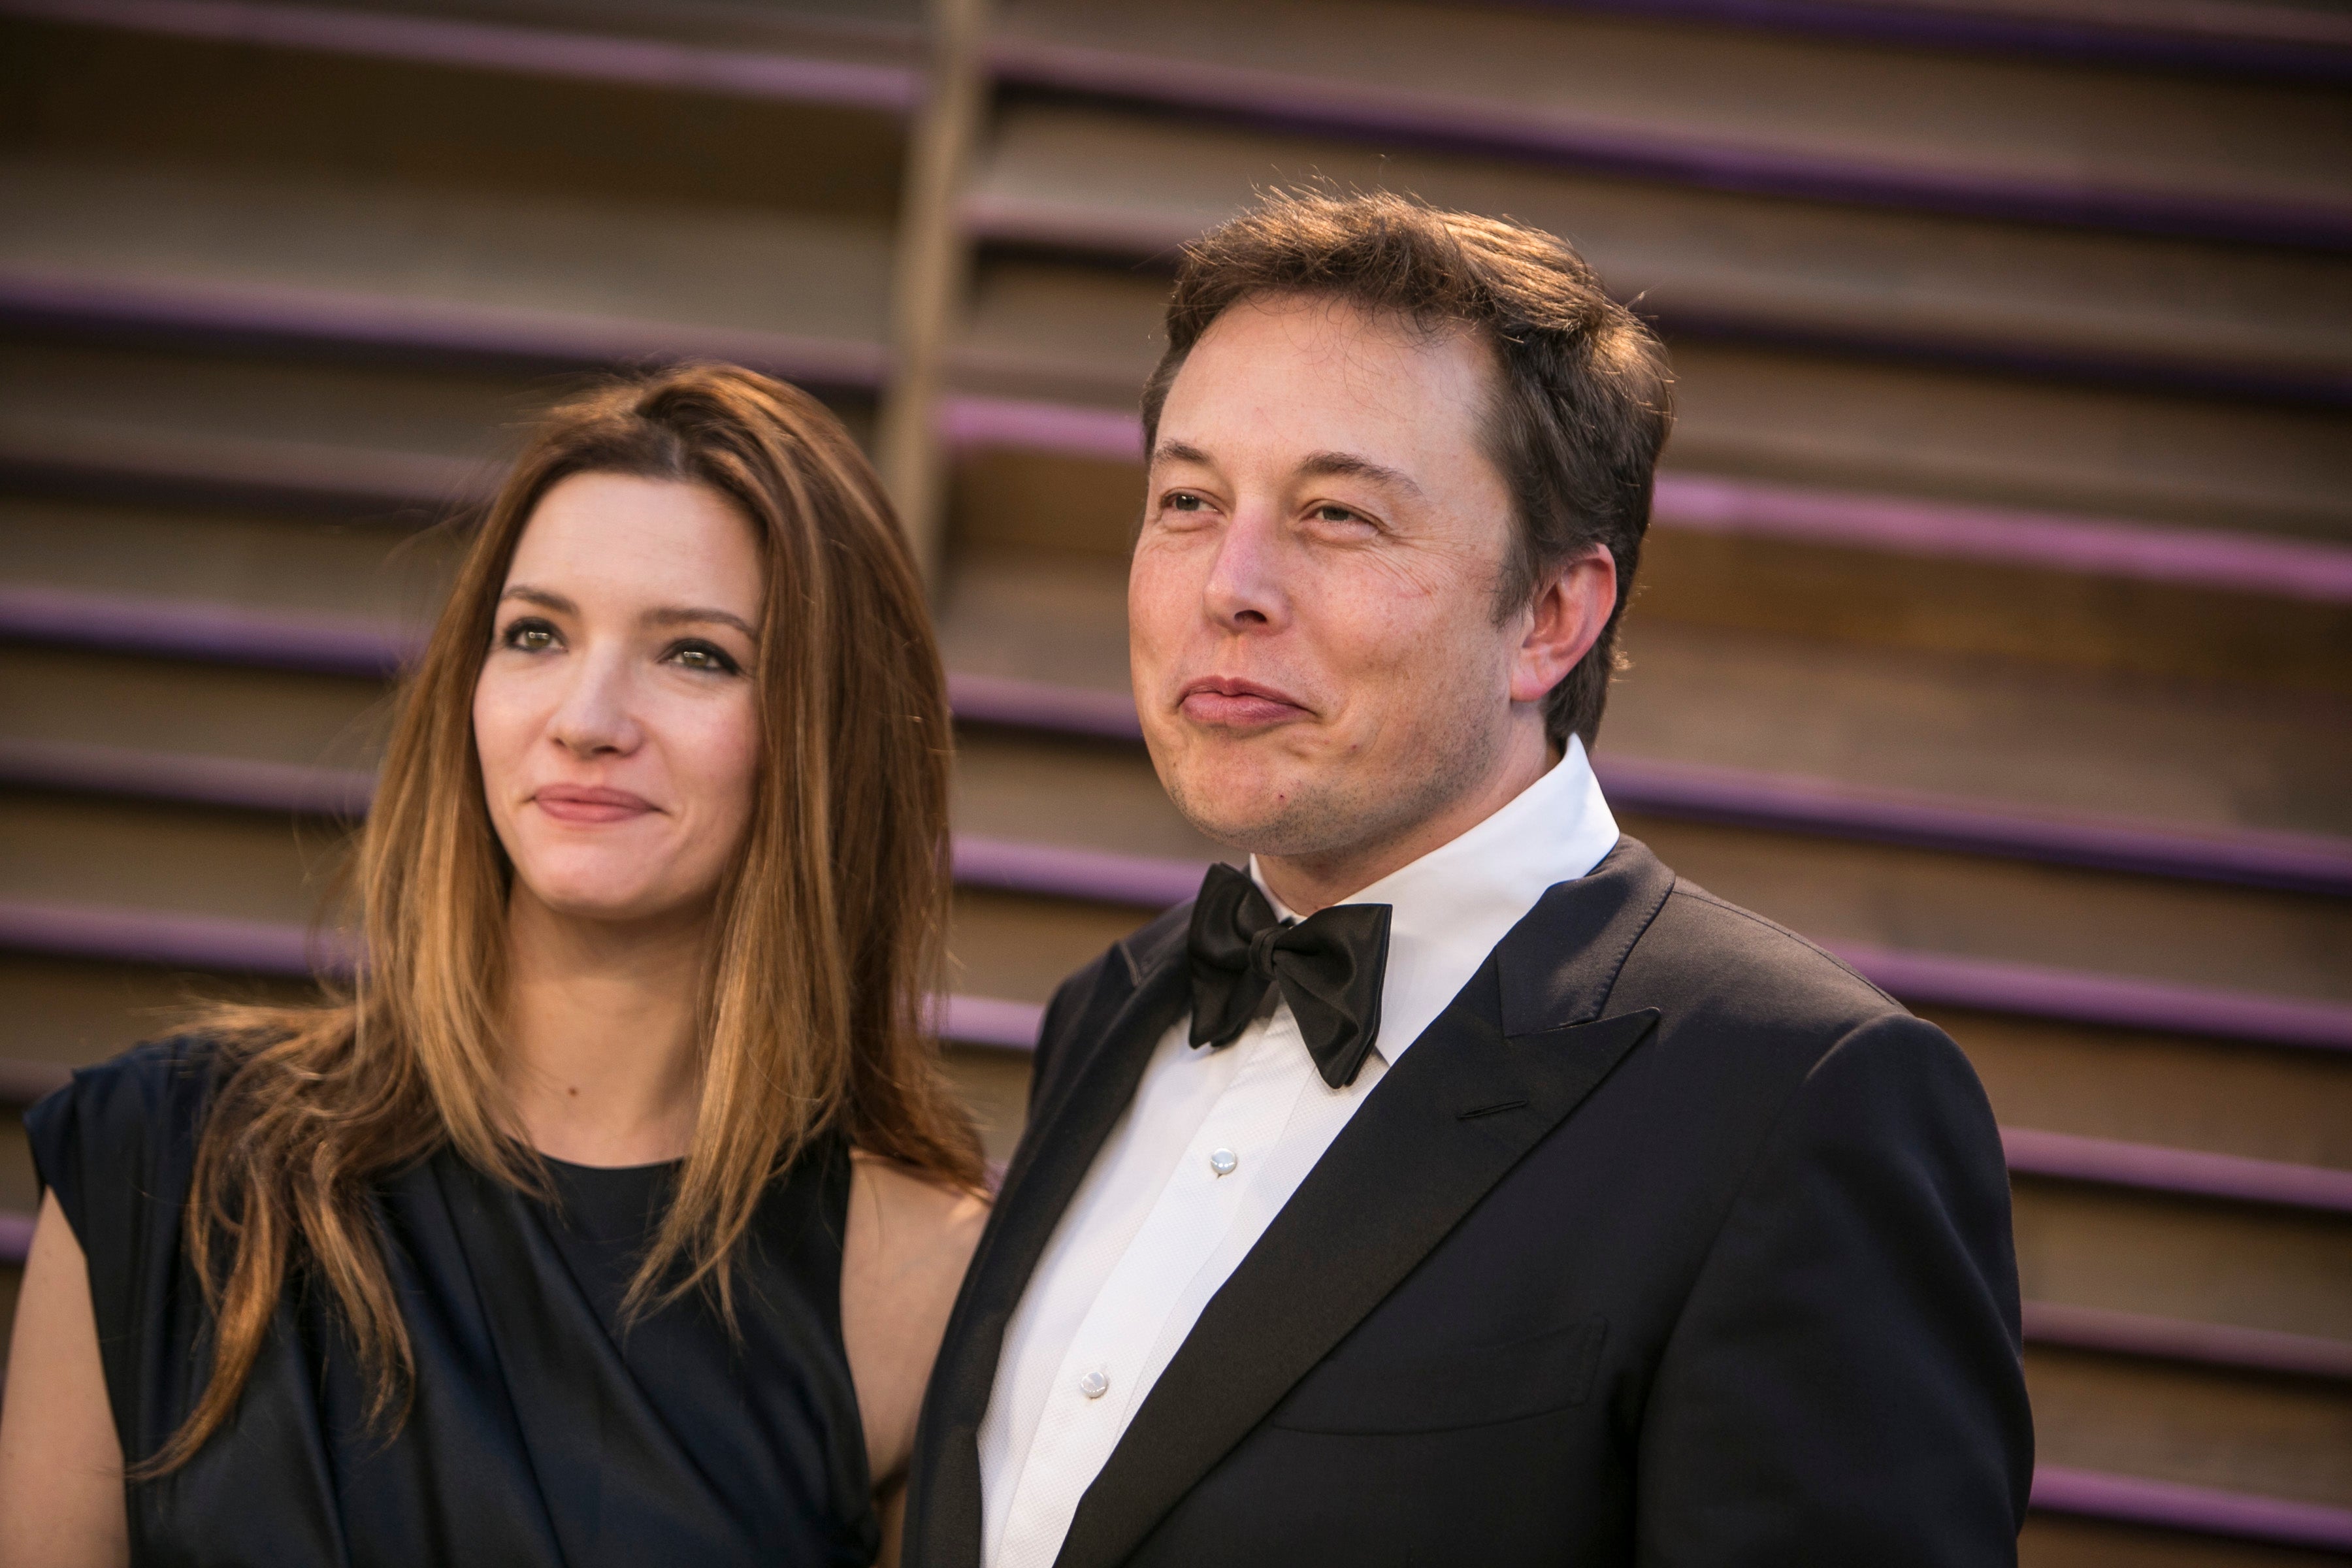 Who are Elon Musk’s relatives?